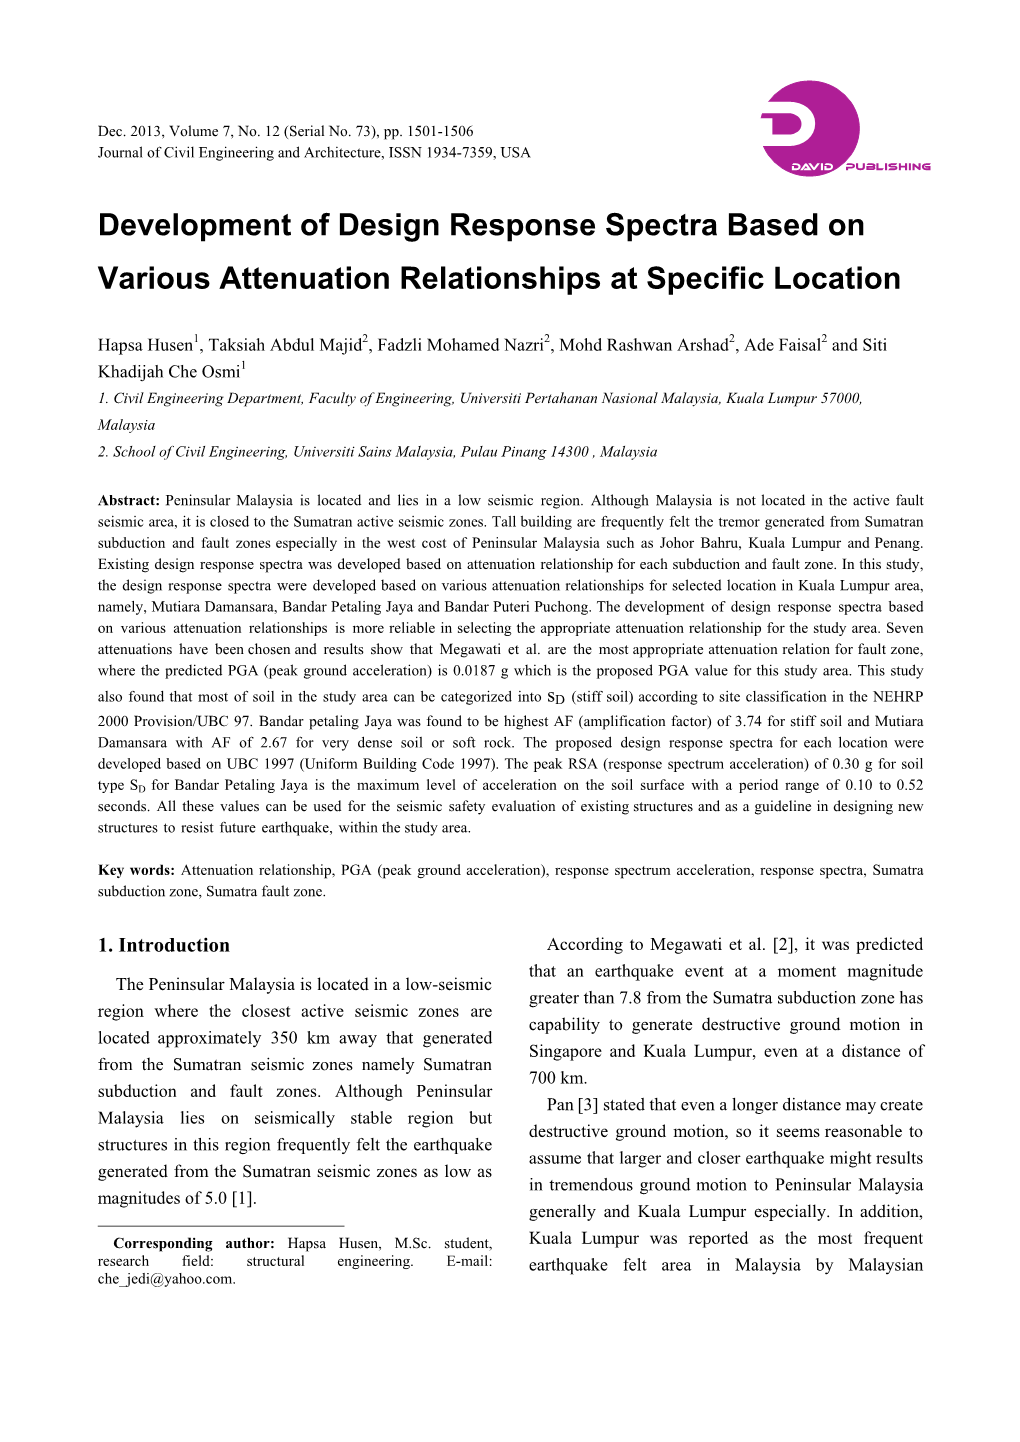 Development of Design Response Spectra Based on Various Attenuation Relationships at Specific Location